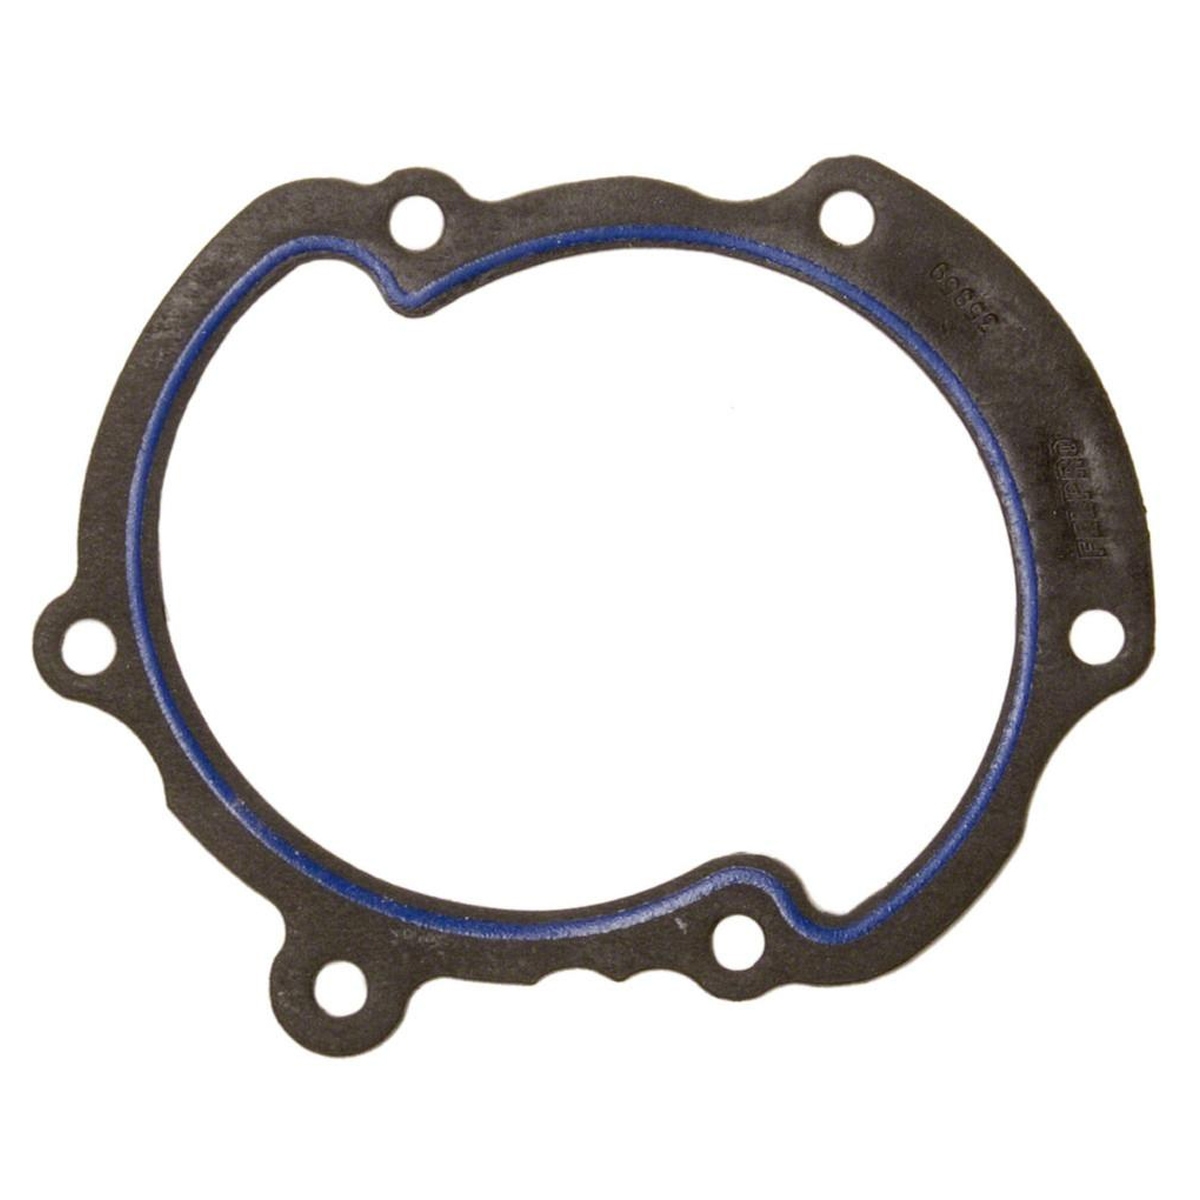 VAUXHALL AND OPEL OMEGA Water Pump Gasket